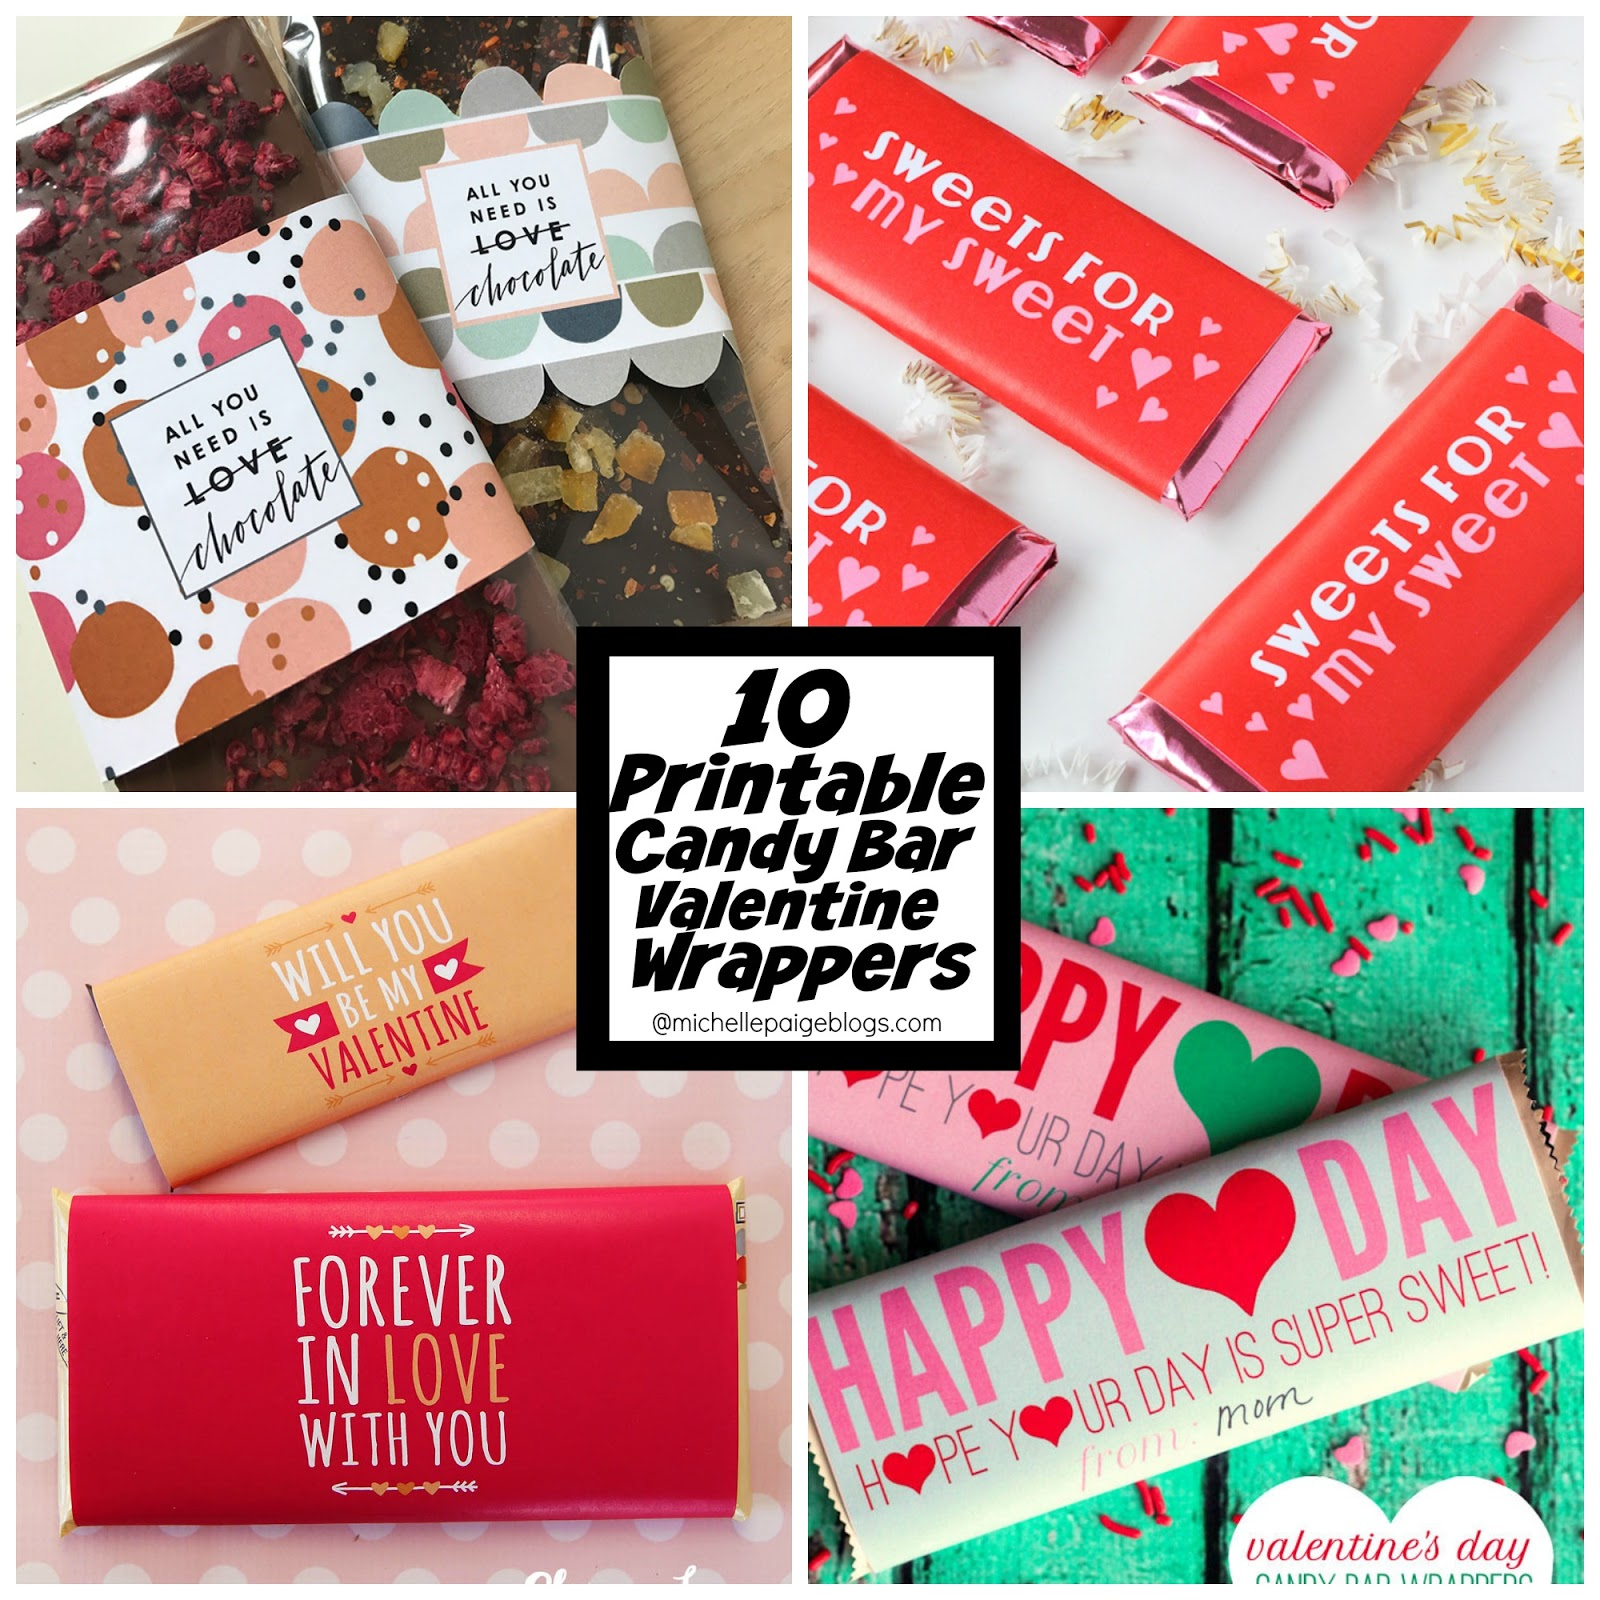 Michelle Paige Blogs: 10 Free Printable Candy Bar Wrapper Valentines - Free Printable Candy Bar Wrappers For Bridal Shower